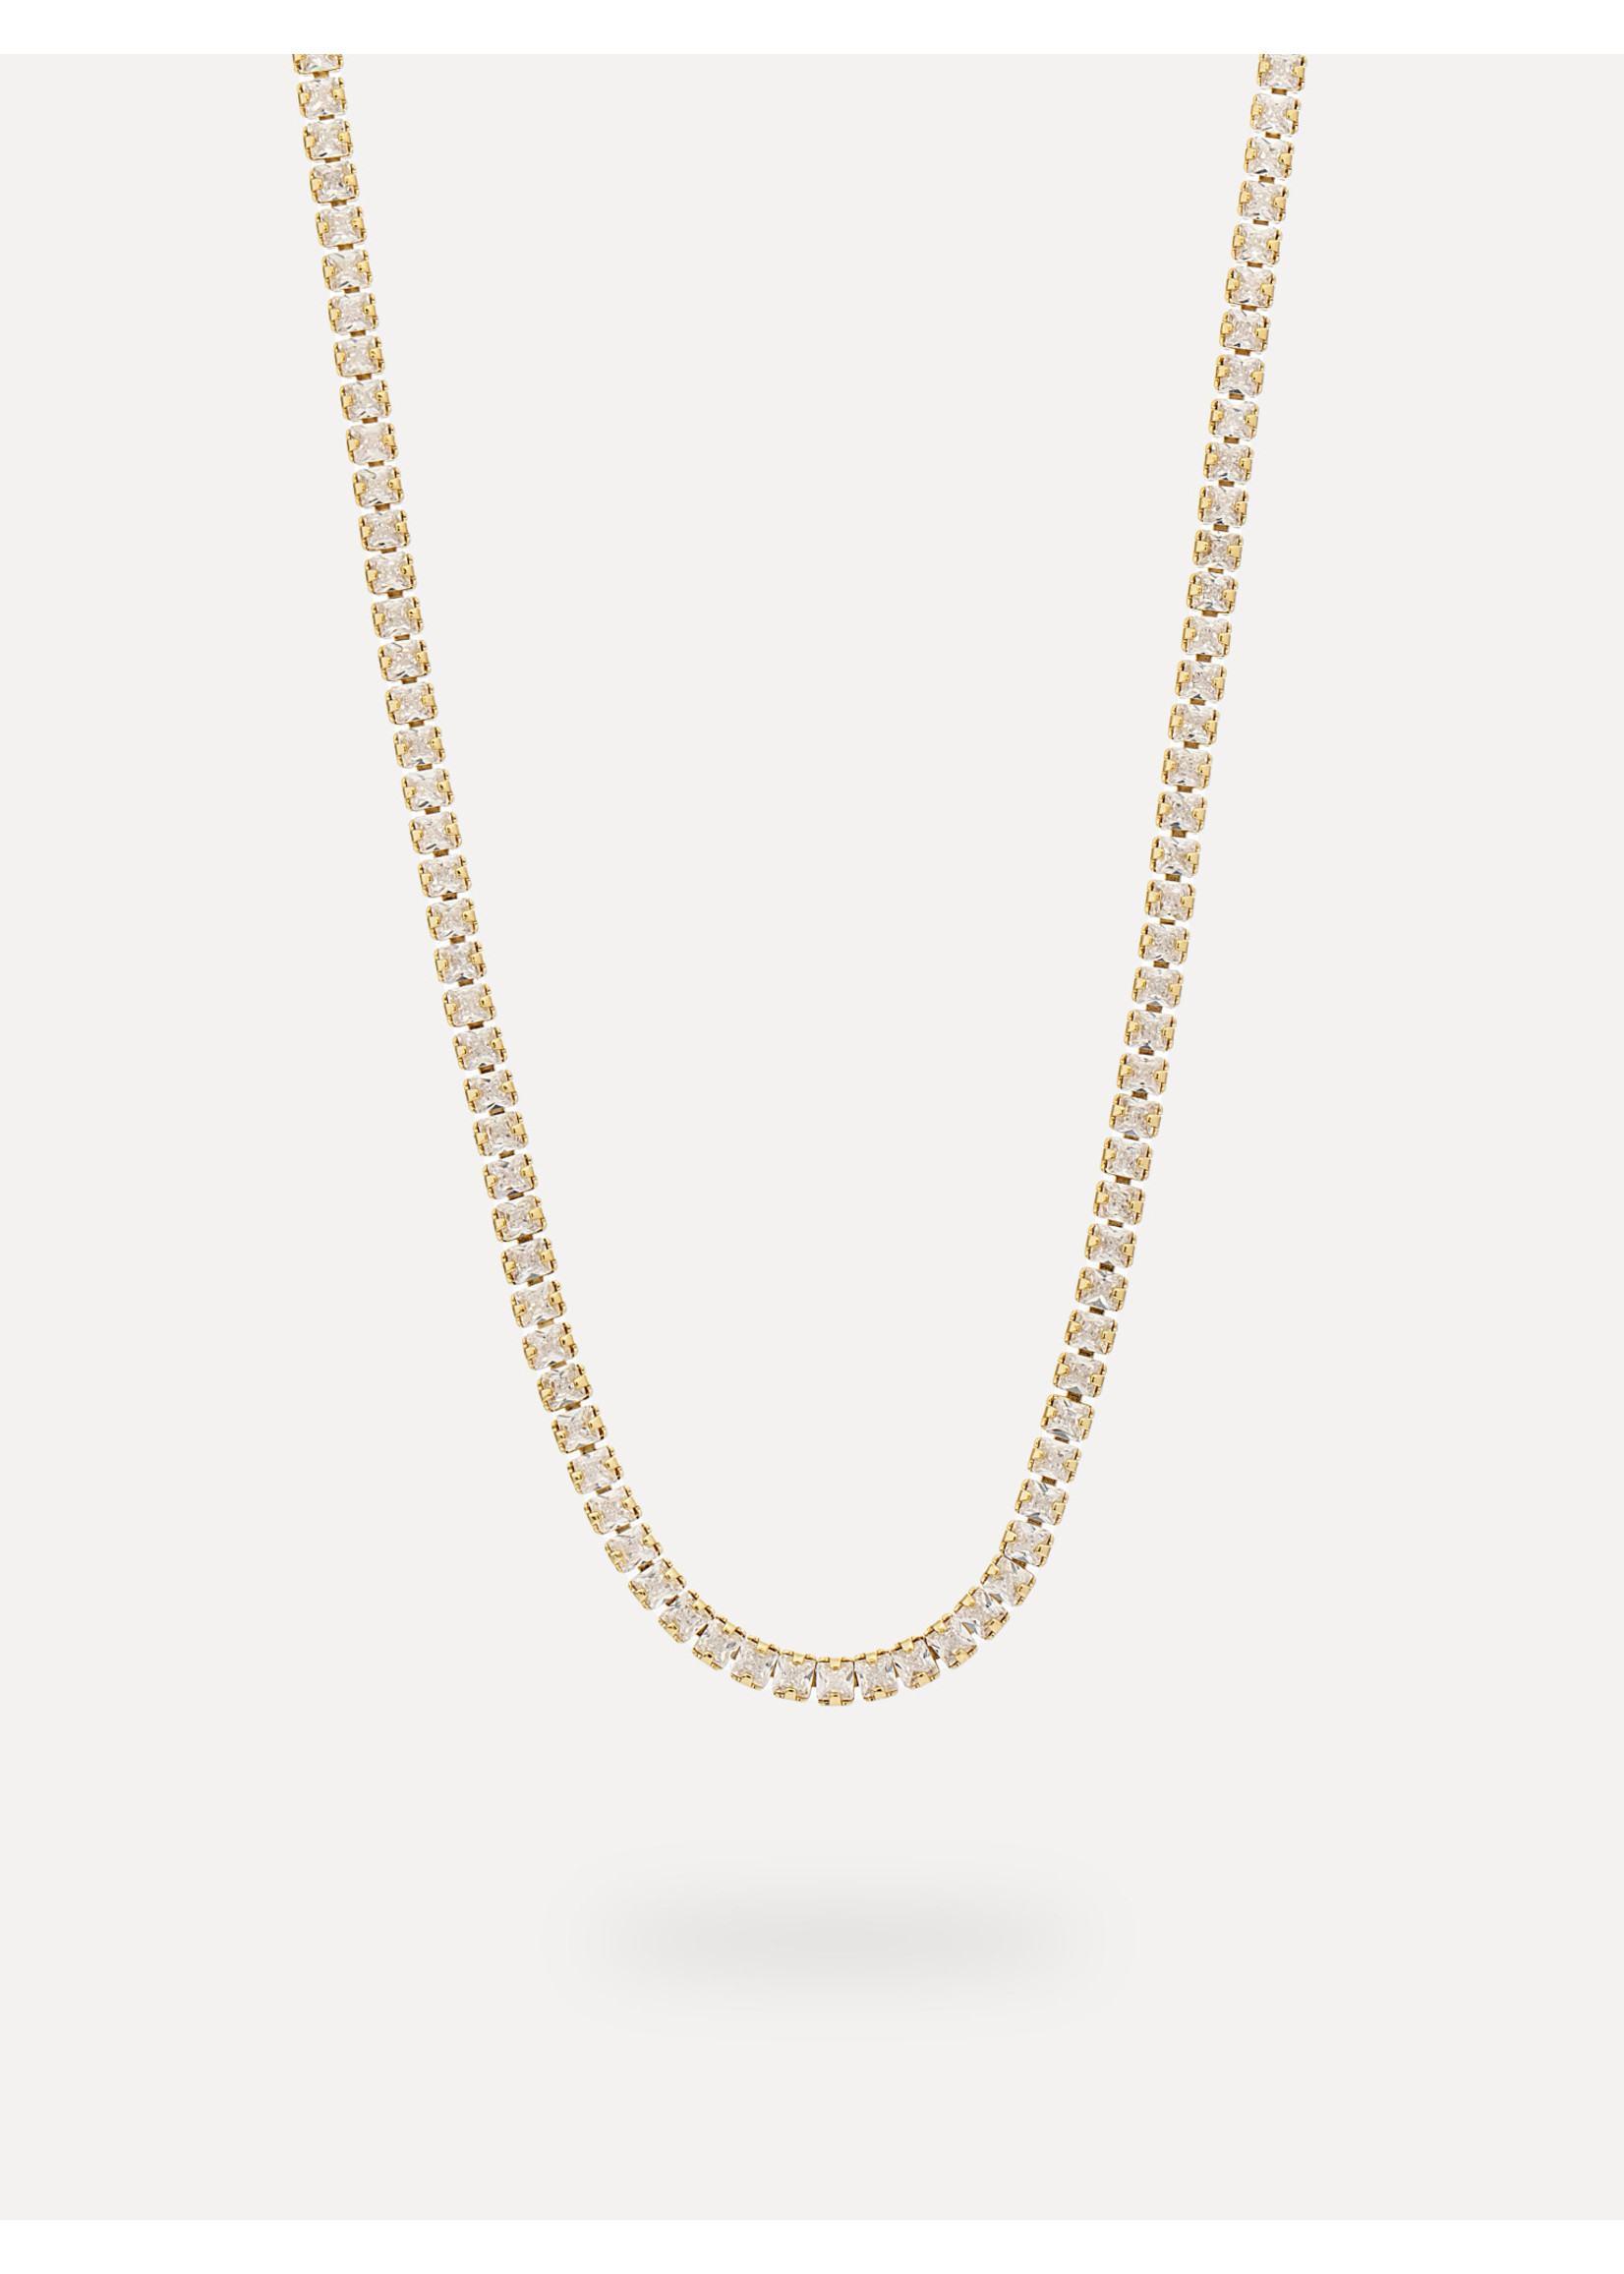 STRASS TENNIS NECKLACE GOLD